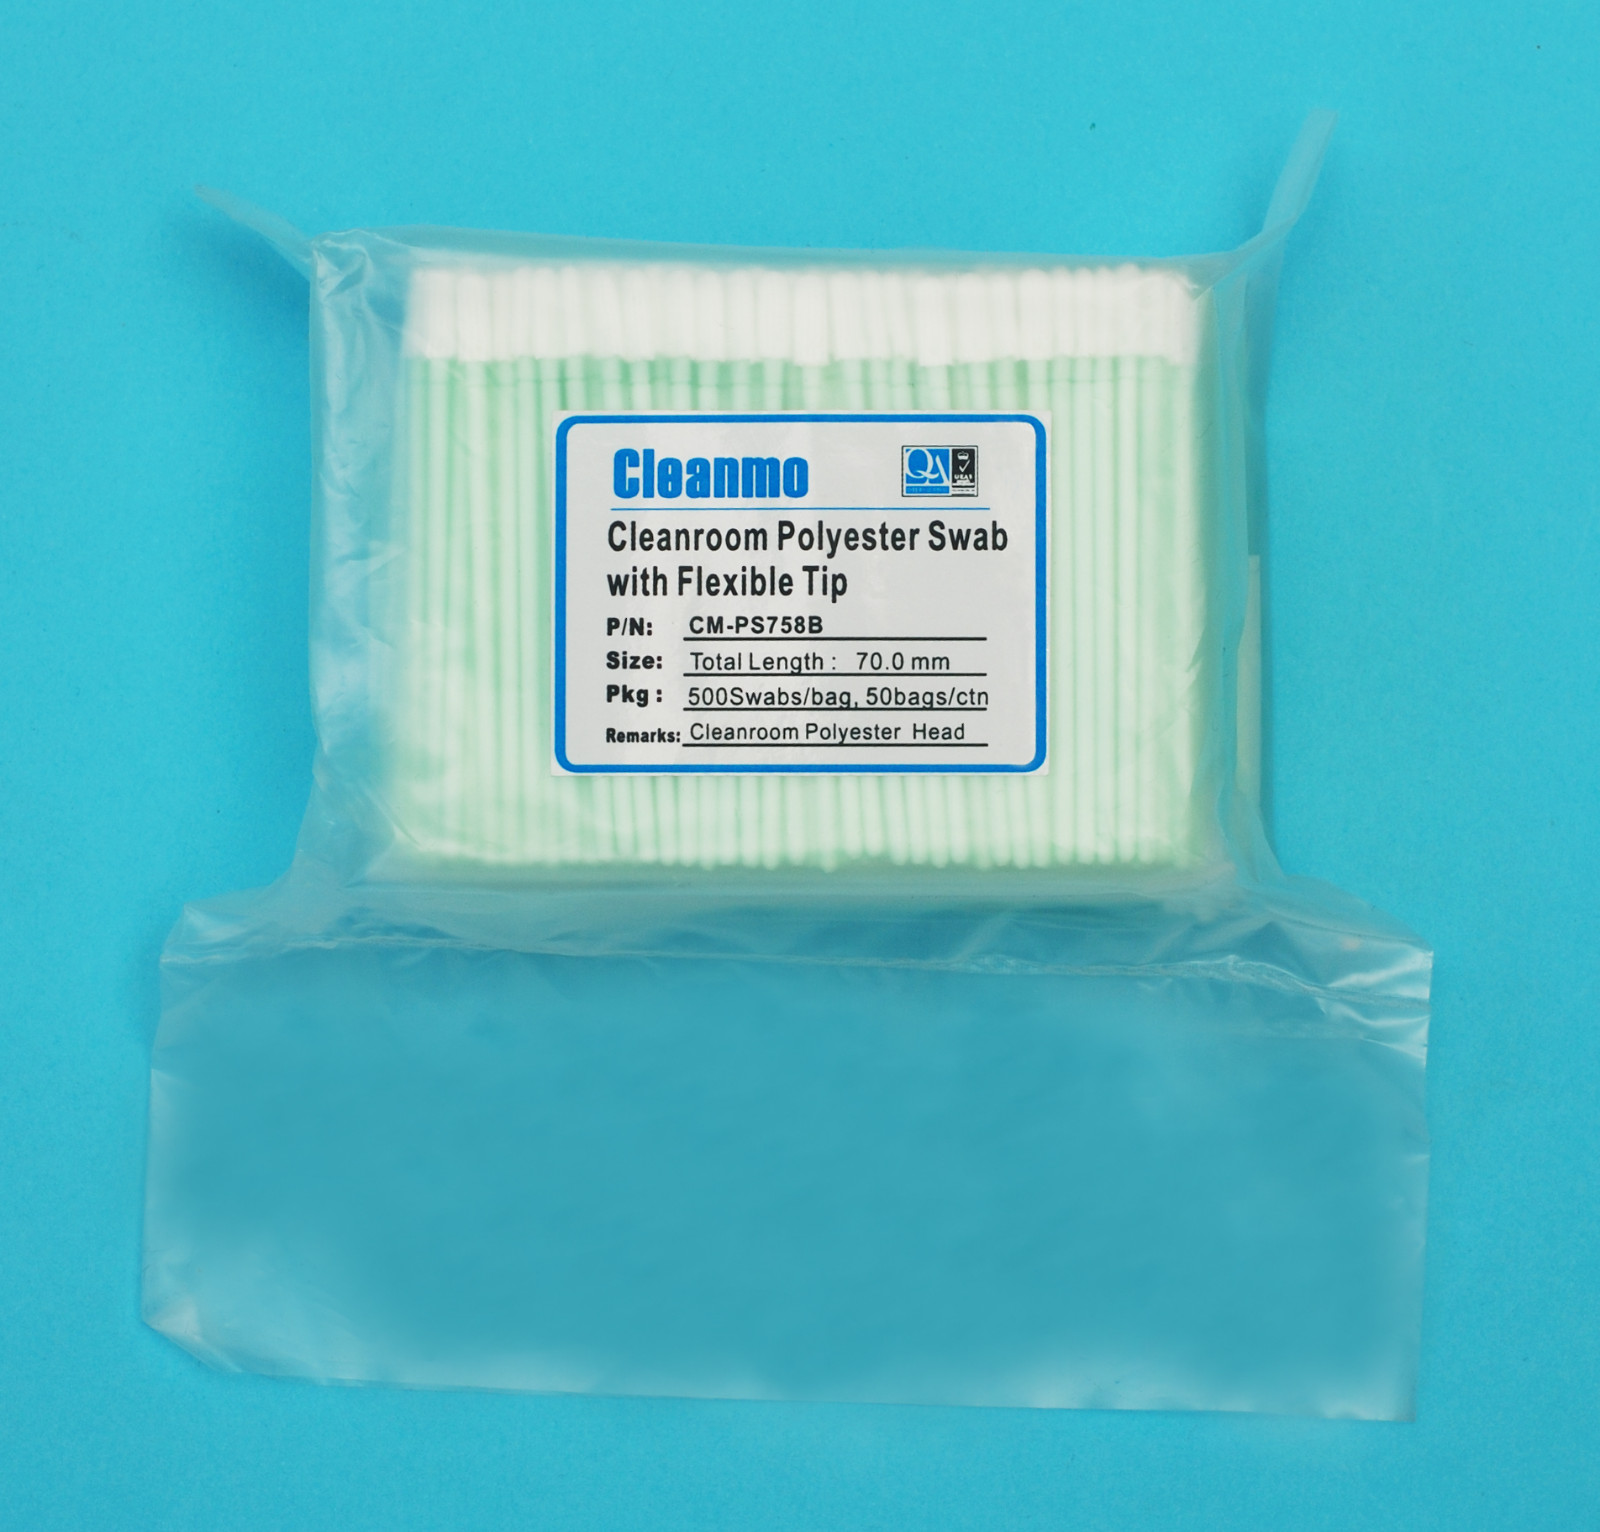 Cleanmo safe material polyester cleanroom swabs manufacturer for optical sensors-7